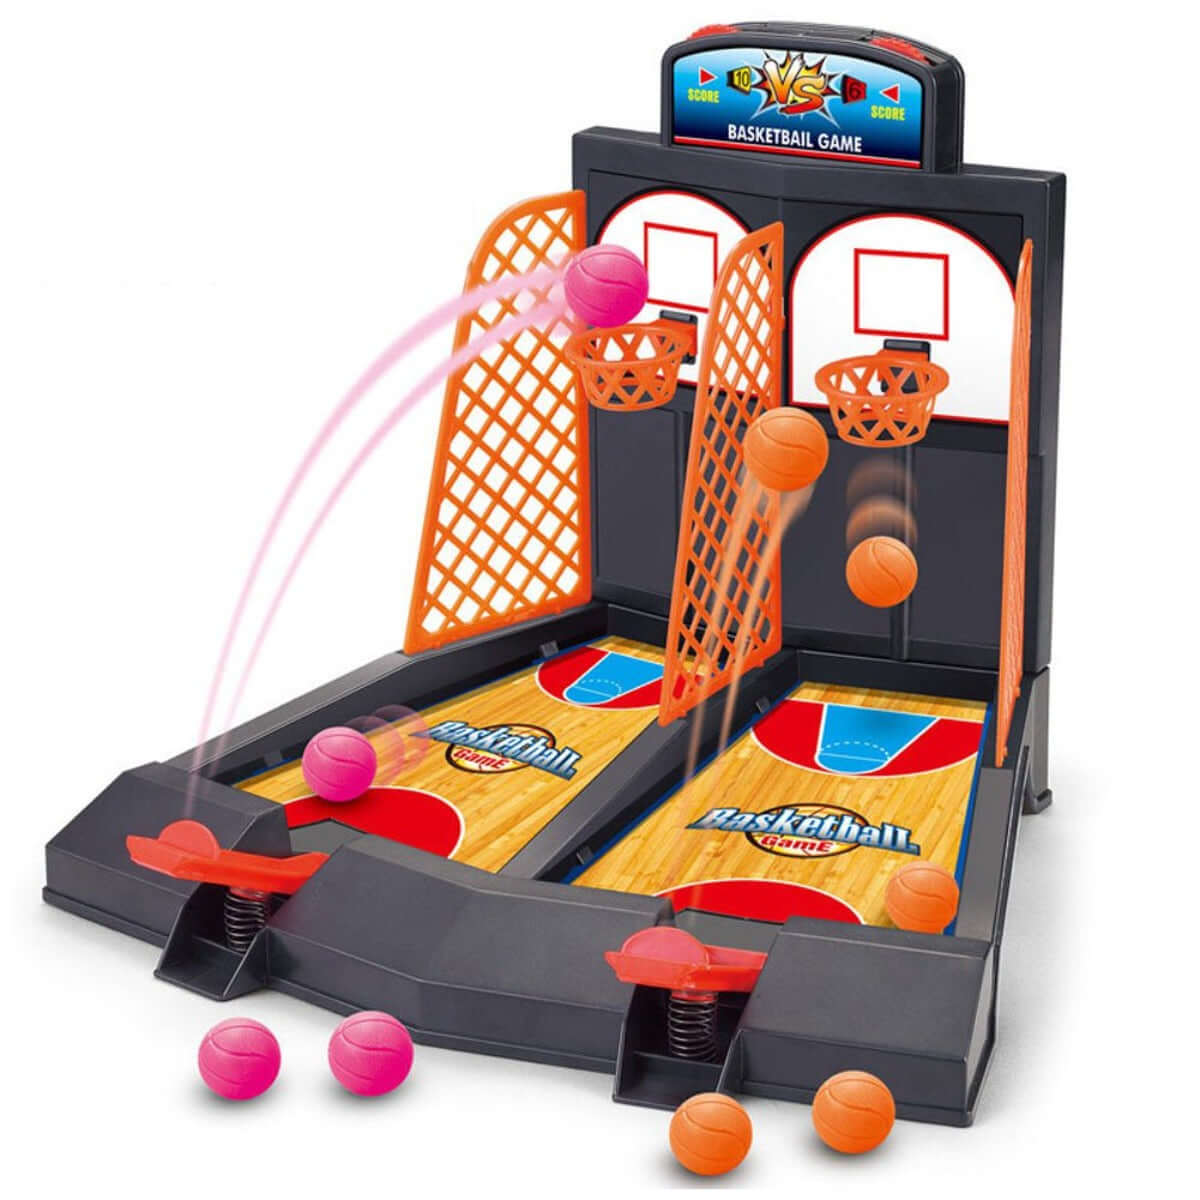 Basketball Crazy Shooting Game. A colorful basketball game with a variety of targets to shoot at. Perfect for kids of all ages. Basketball Crazy Shooting - Keedlee gaming toy in dhaka